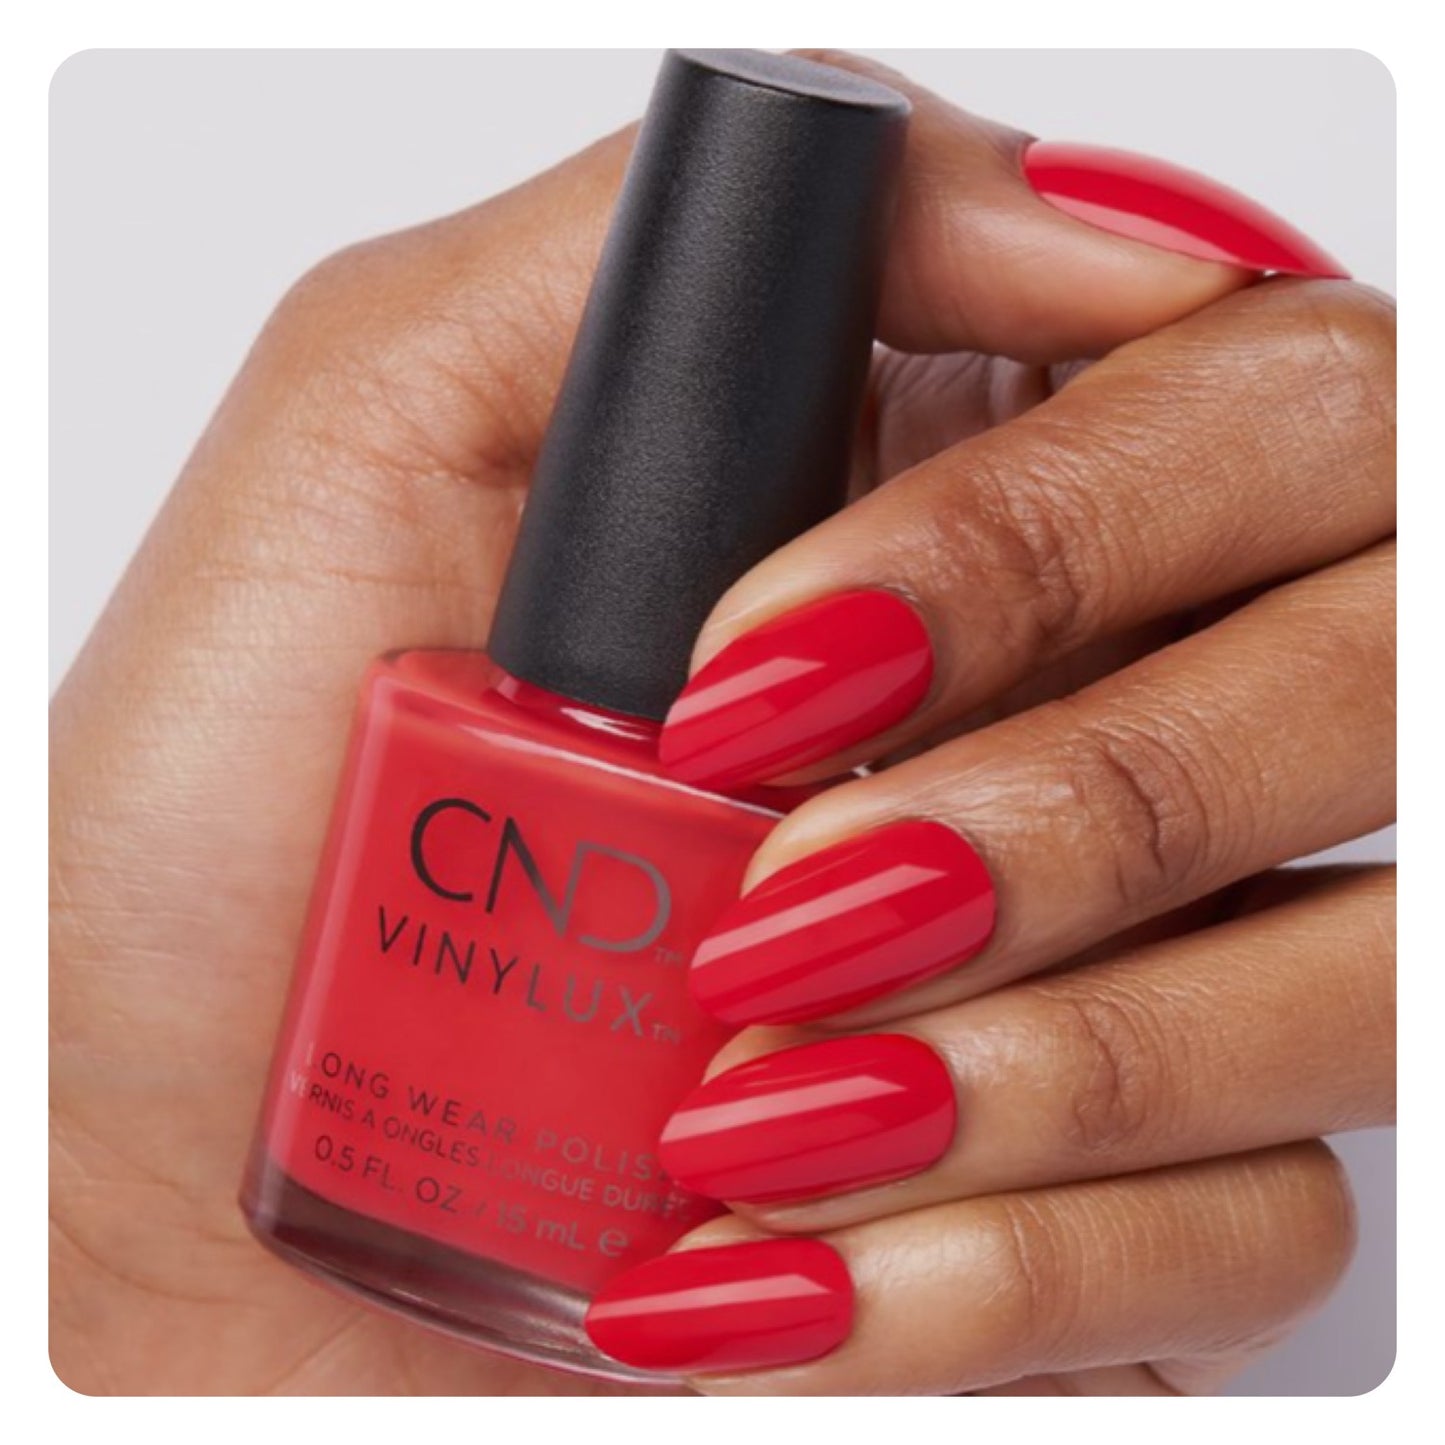 VINYLUX Hot or Knot